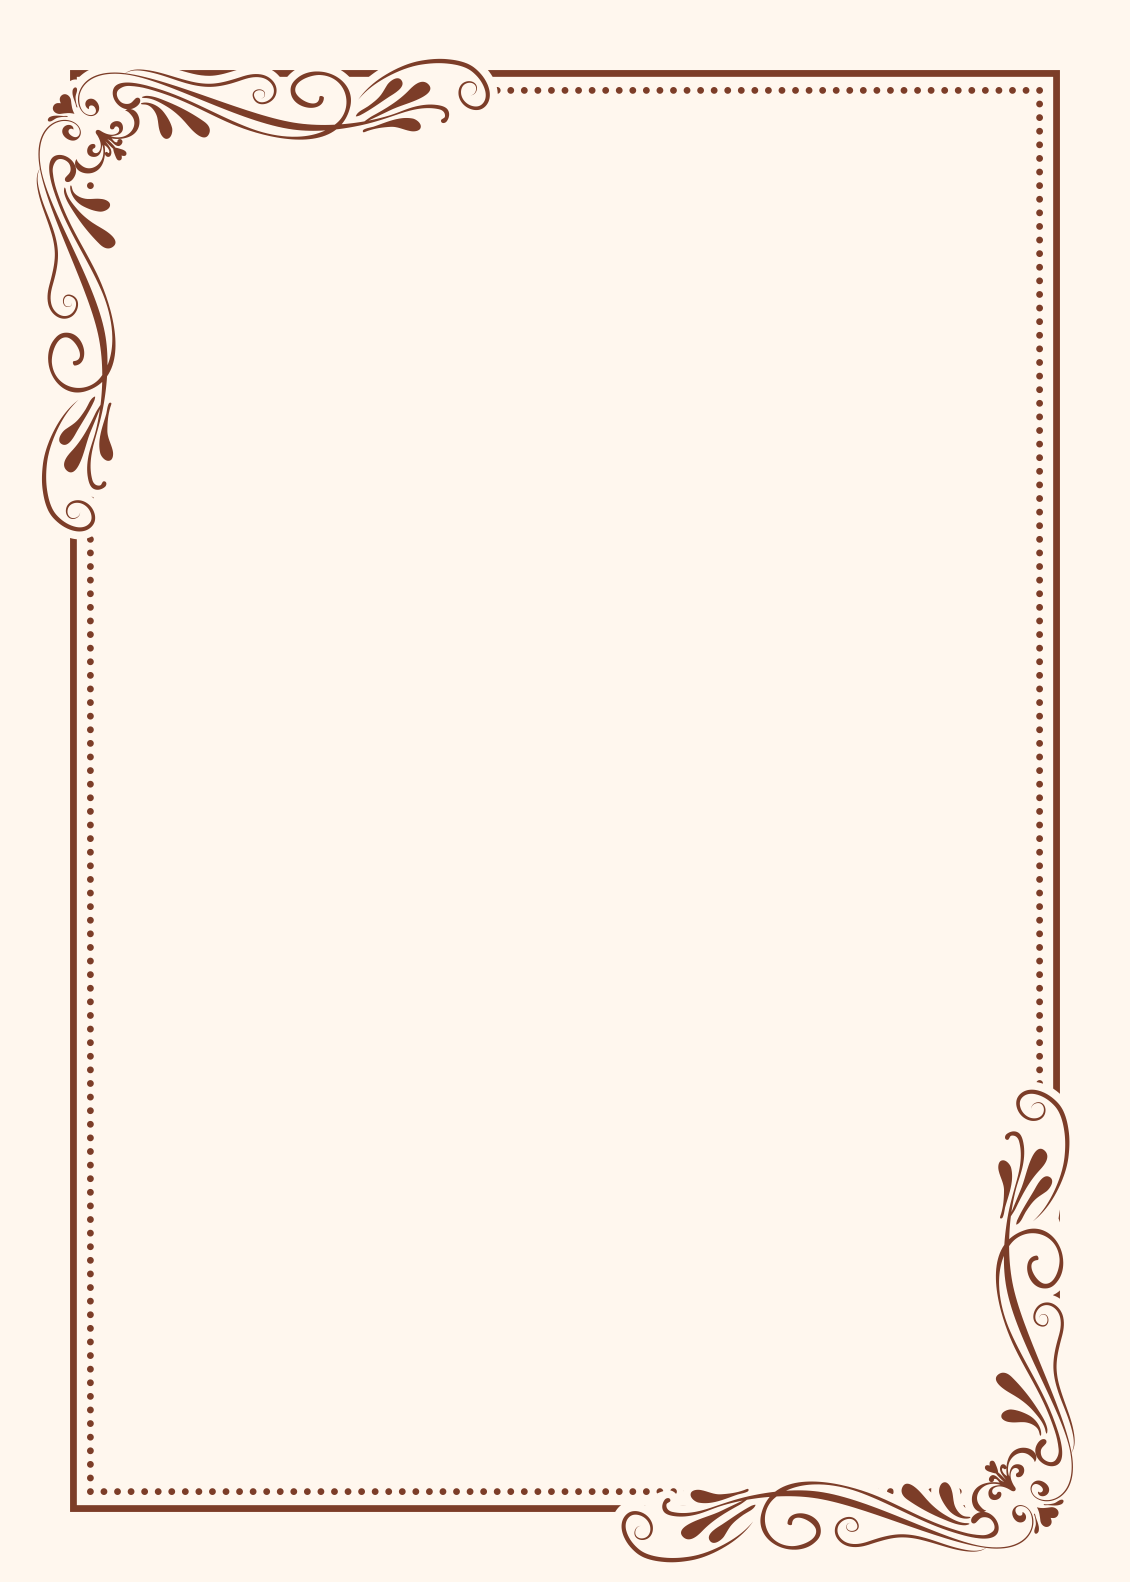 border designs for cards vector